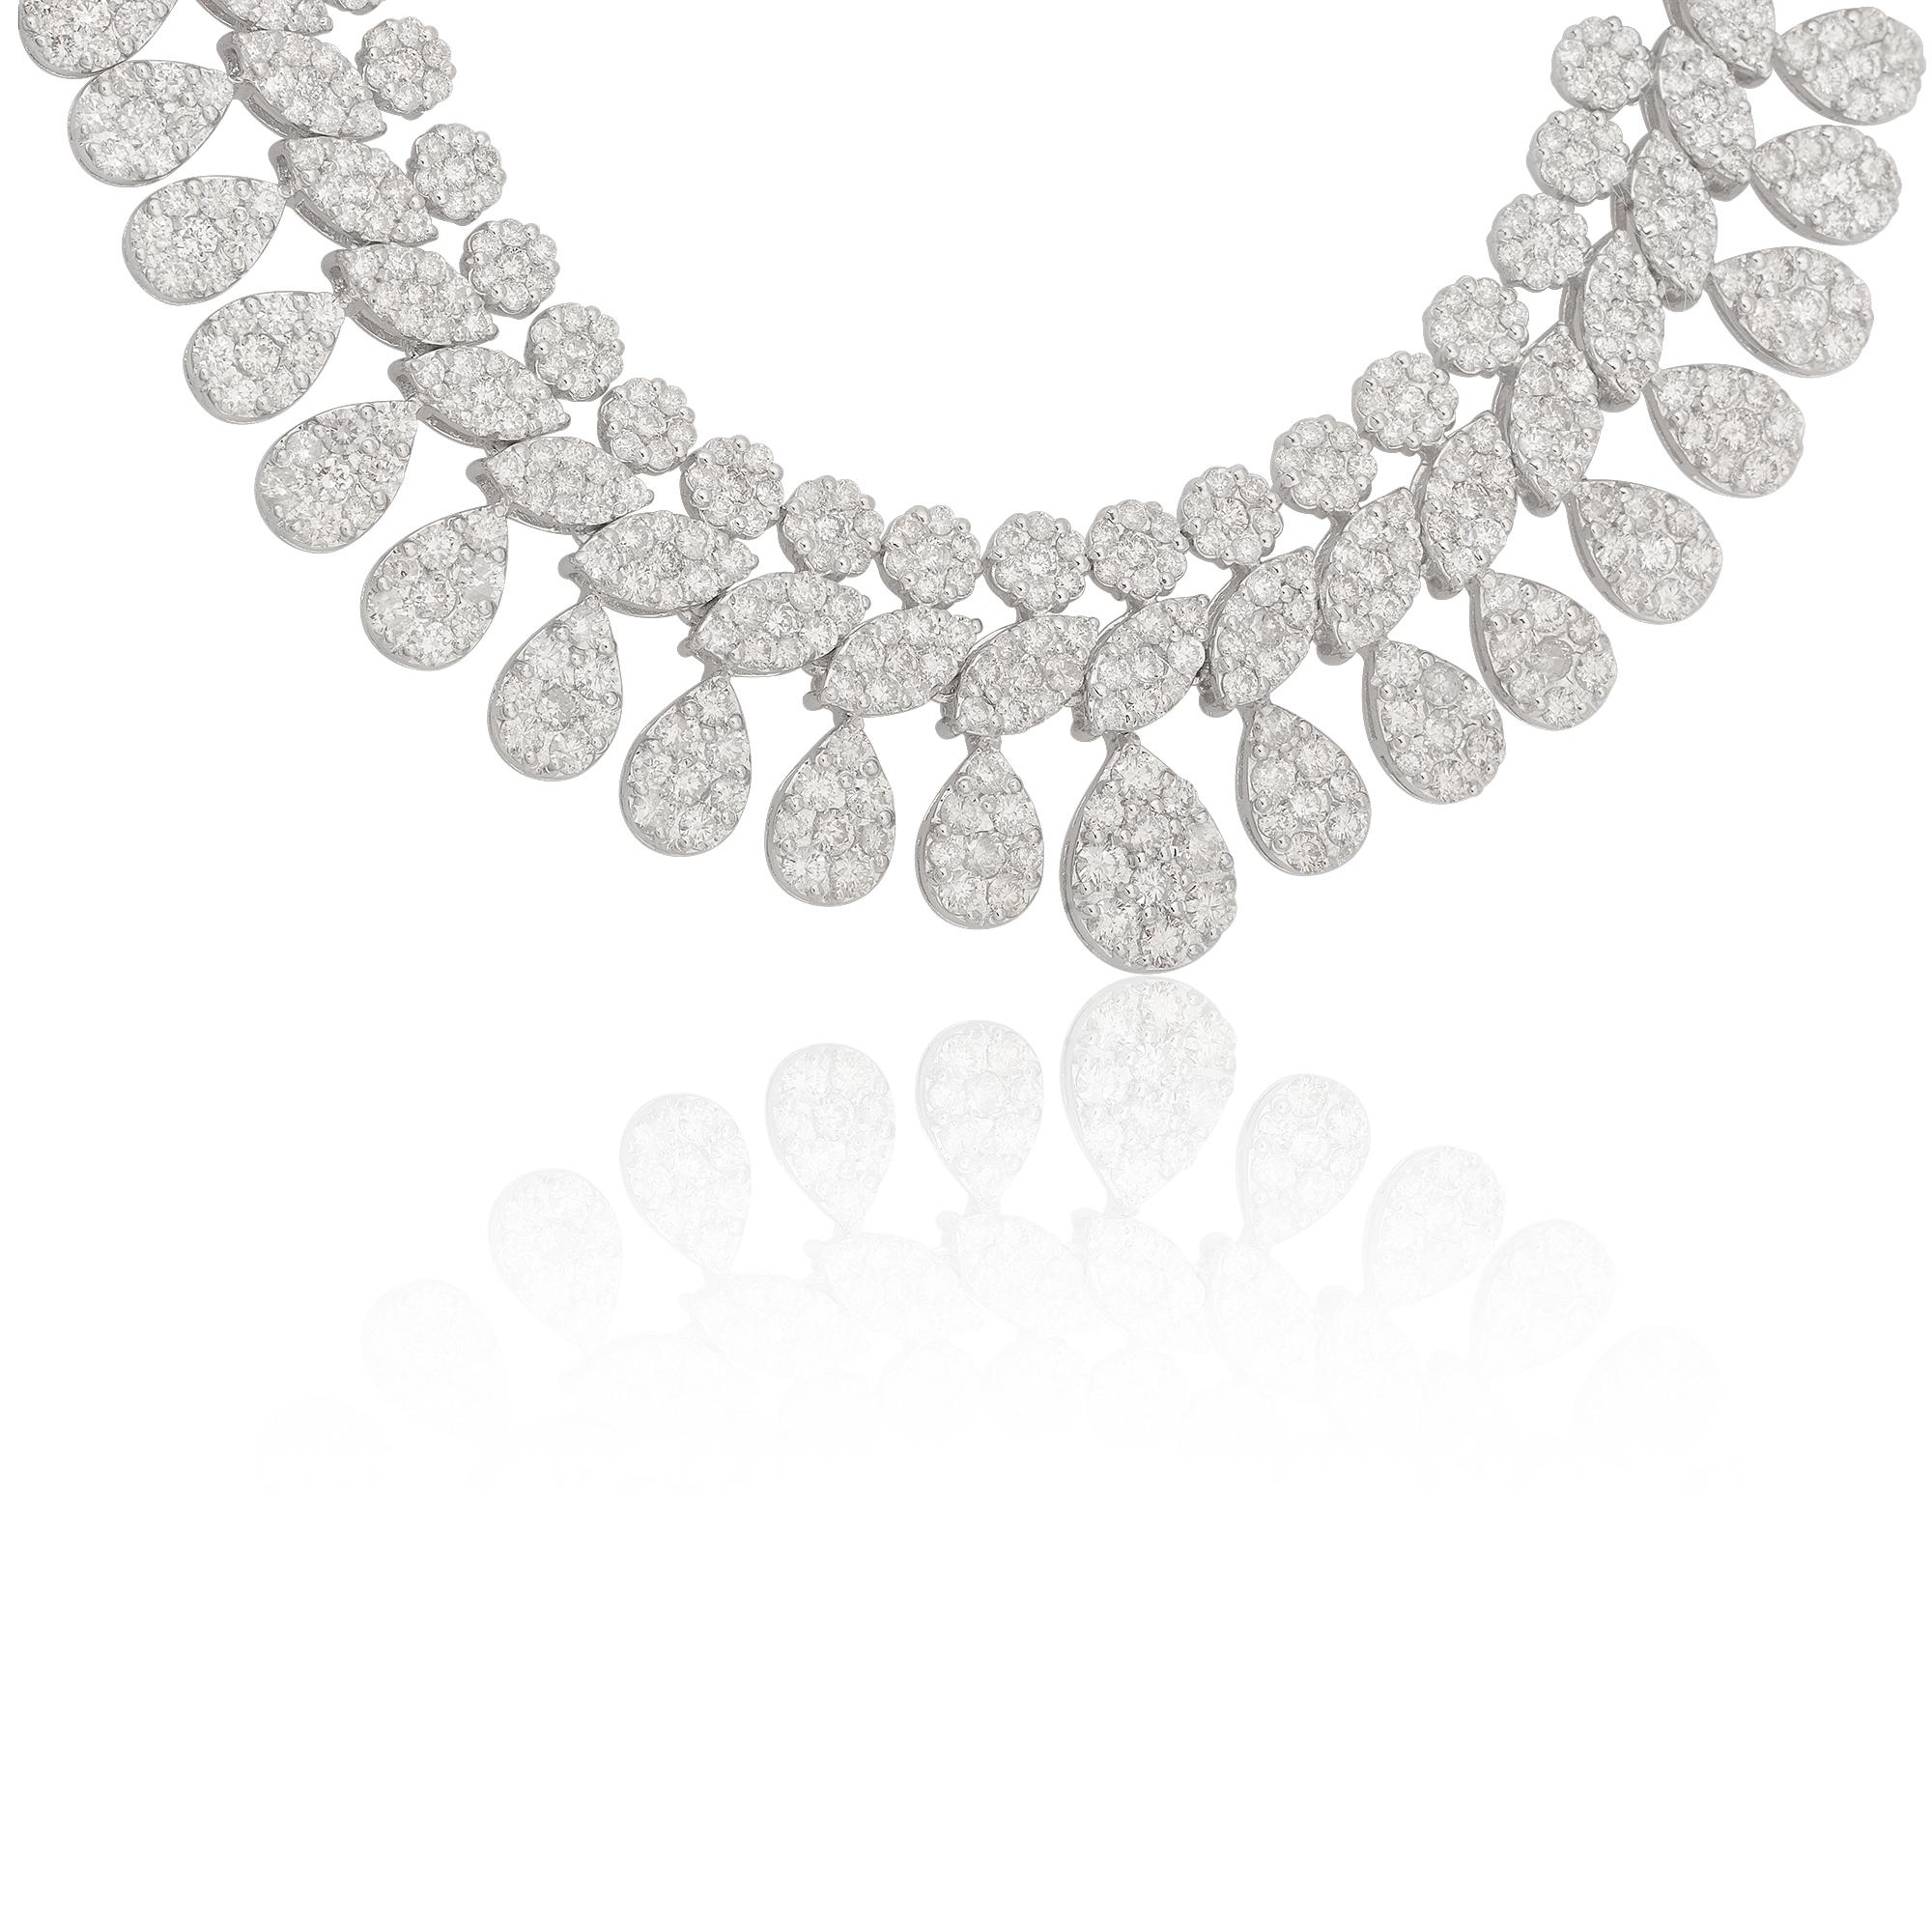 This diamond choker necklace is a statement piece that exudes sophistication and luxury. It is perfect for special occasions, red carpet events, or any moment when you want to make a lasting impression. The sheer brilliance and size of the diamonds